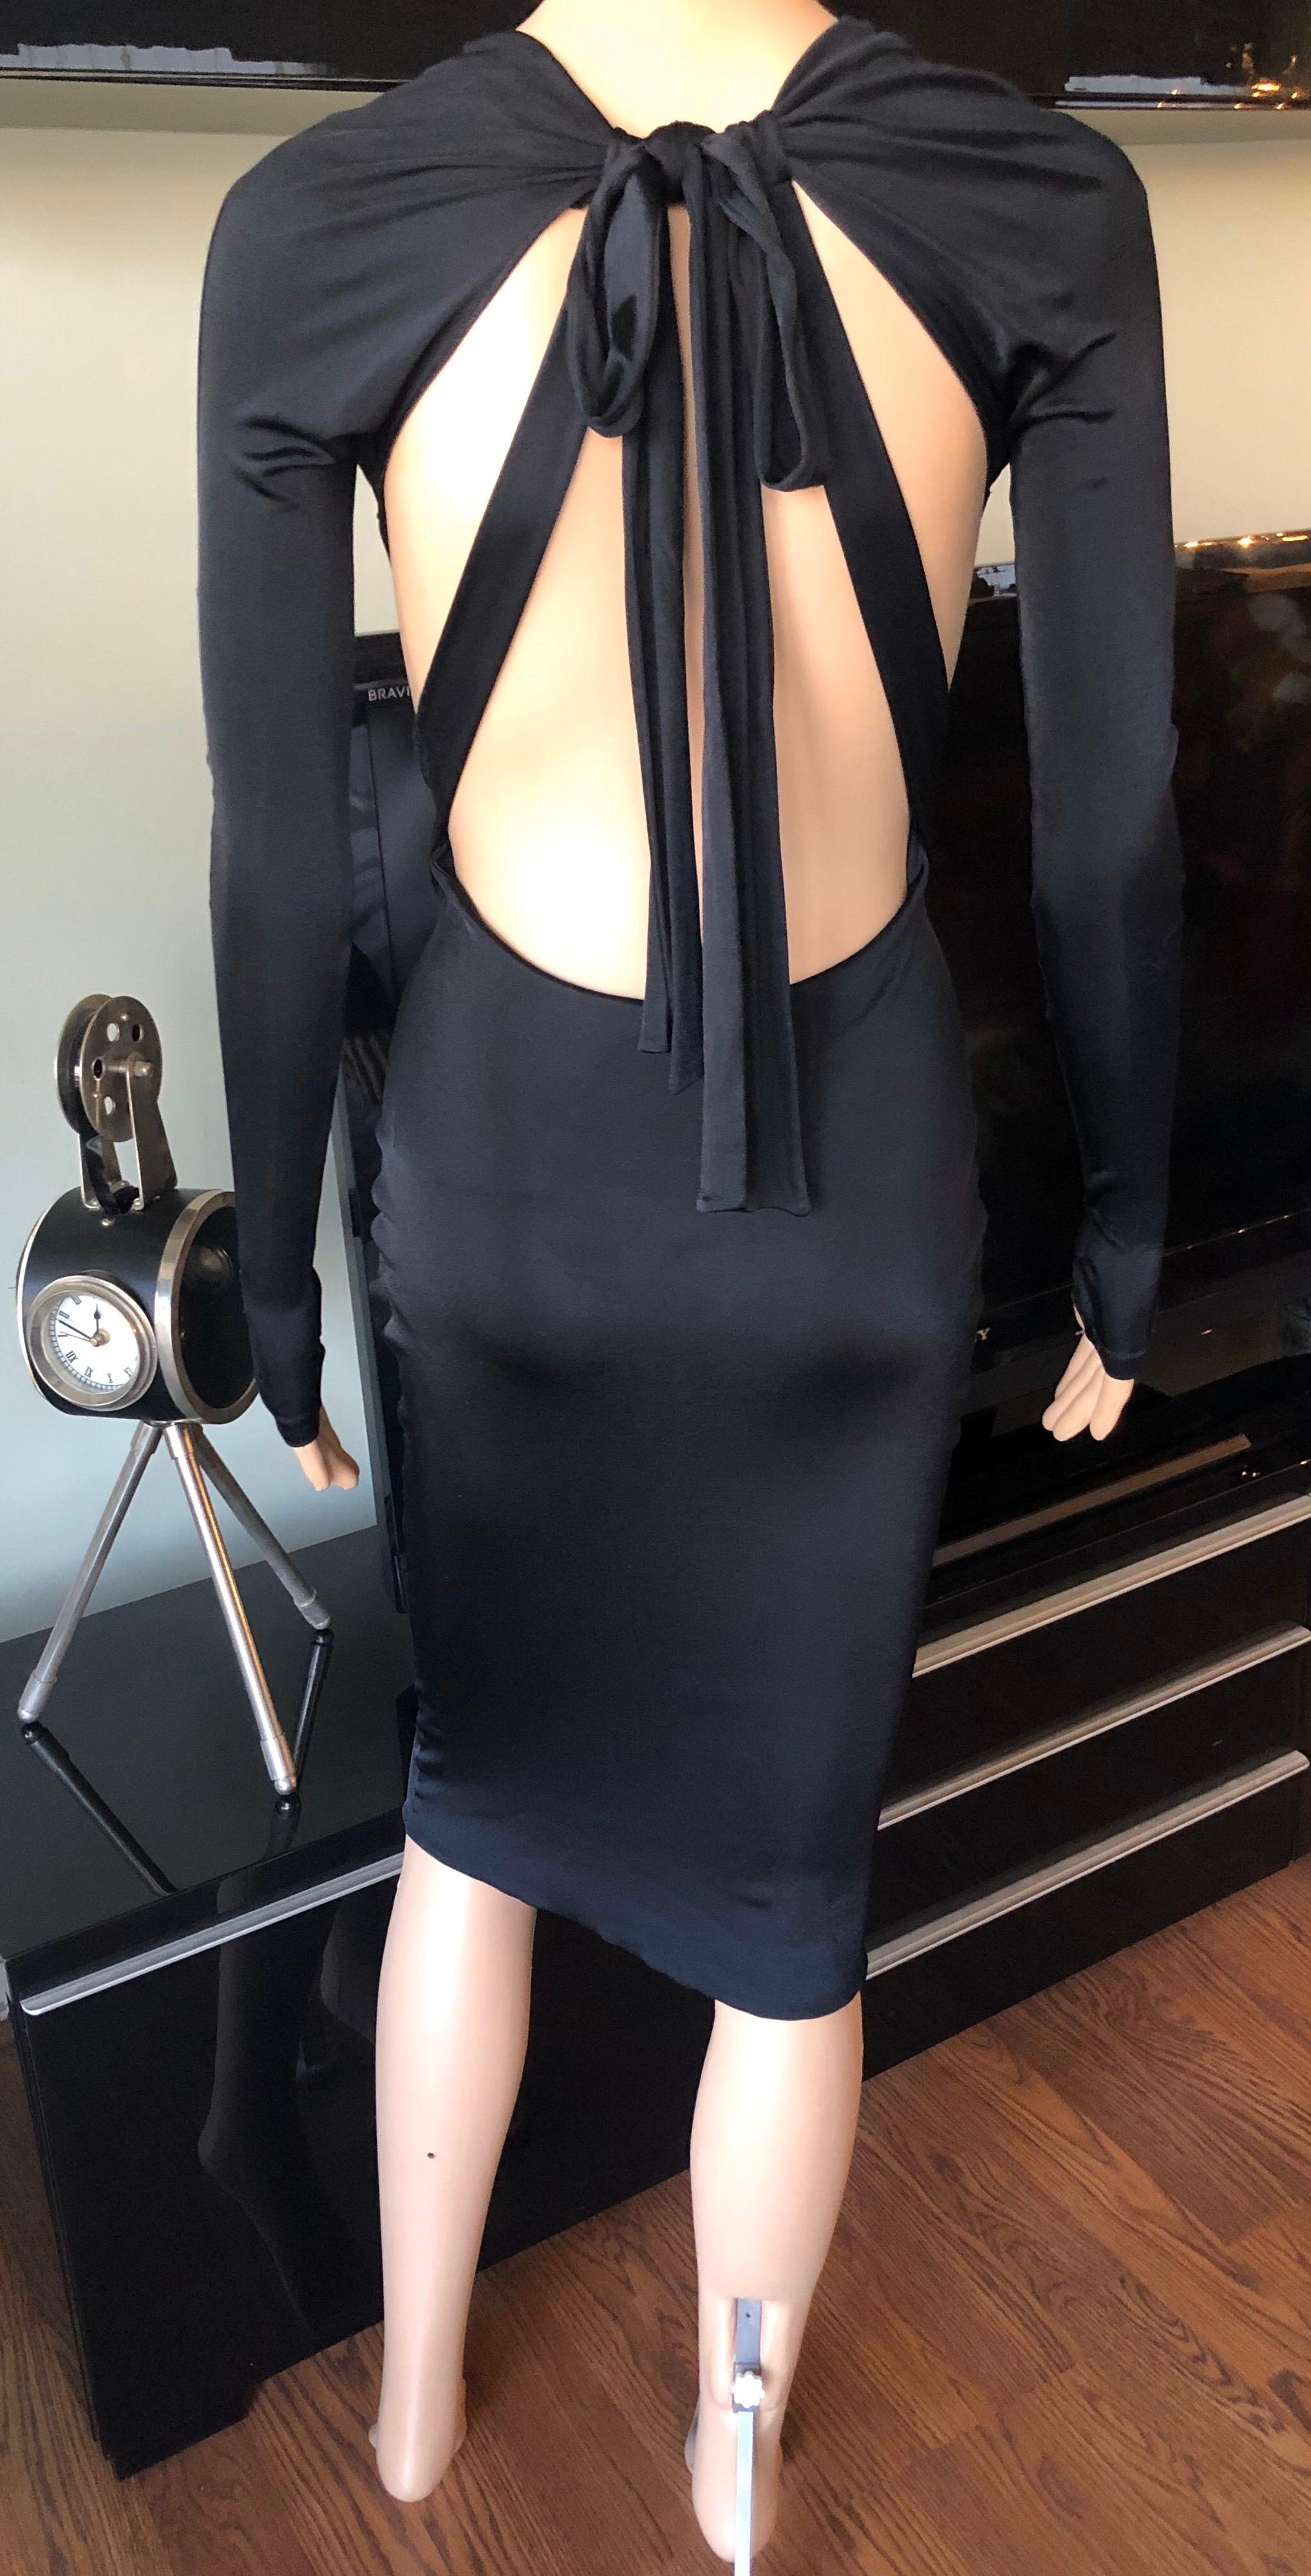 Gucci S/S 2005 Tom Ford Plunging Cutout Backless Bodycon Black Dress en vente 4